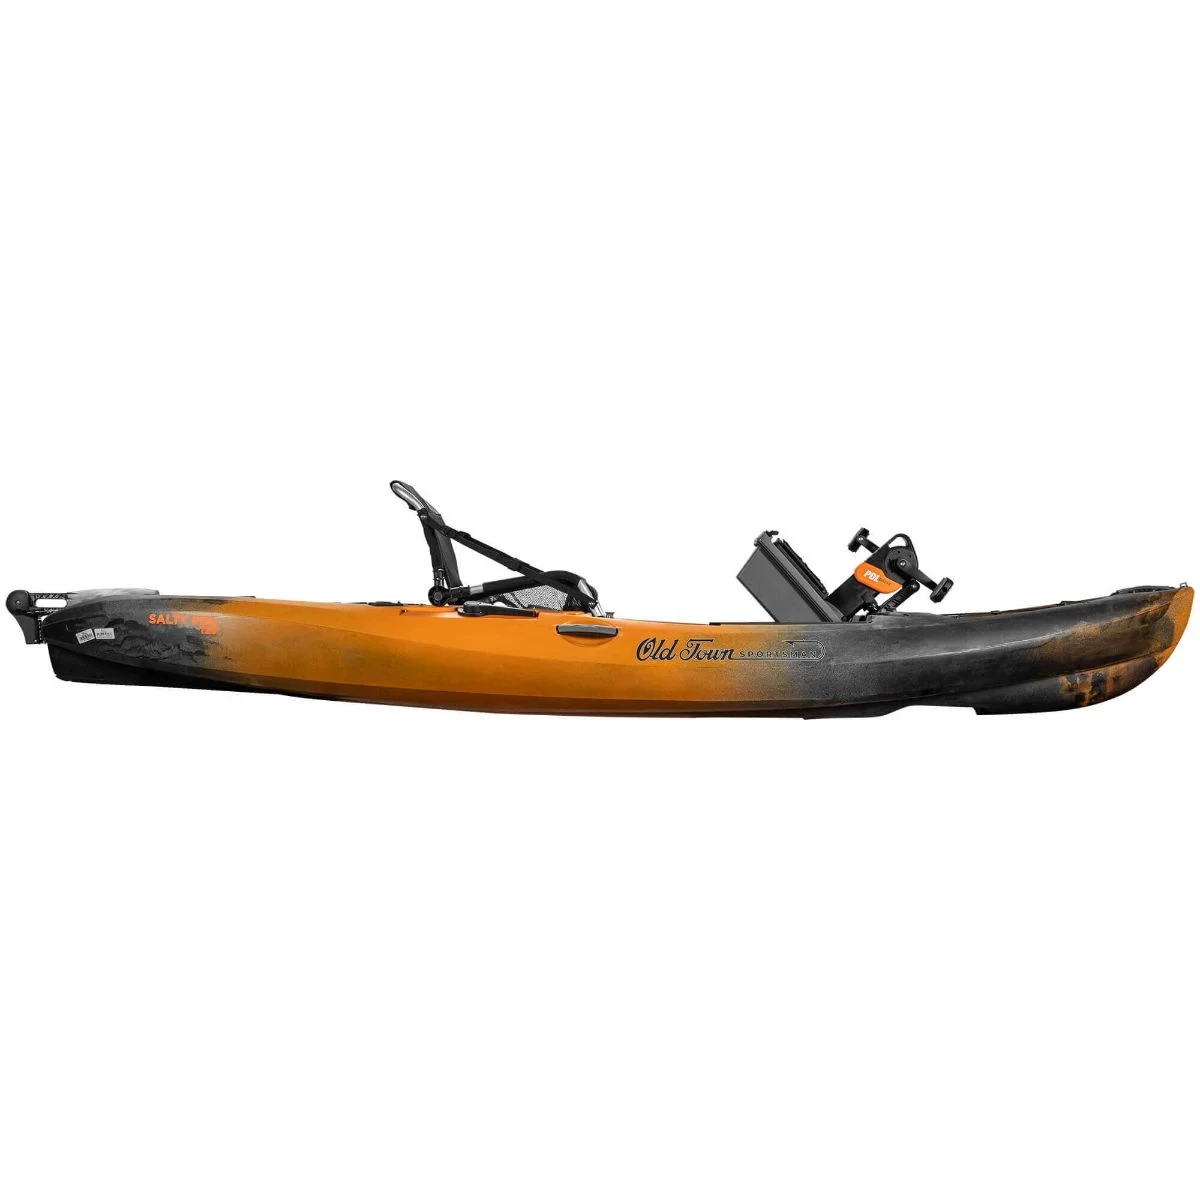 Old Town Sportsman Salty PDL 120 - Ember Camo - Angled View prop up